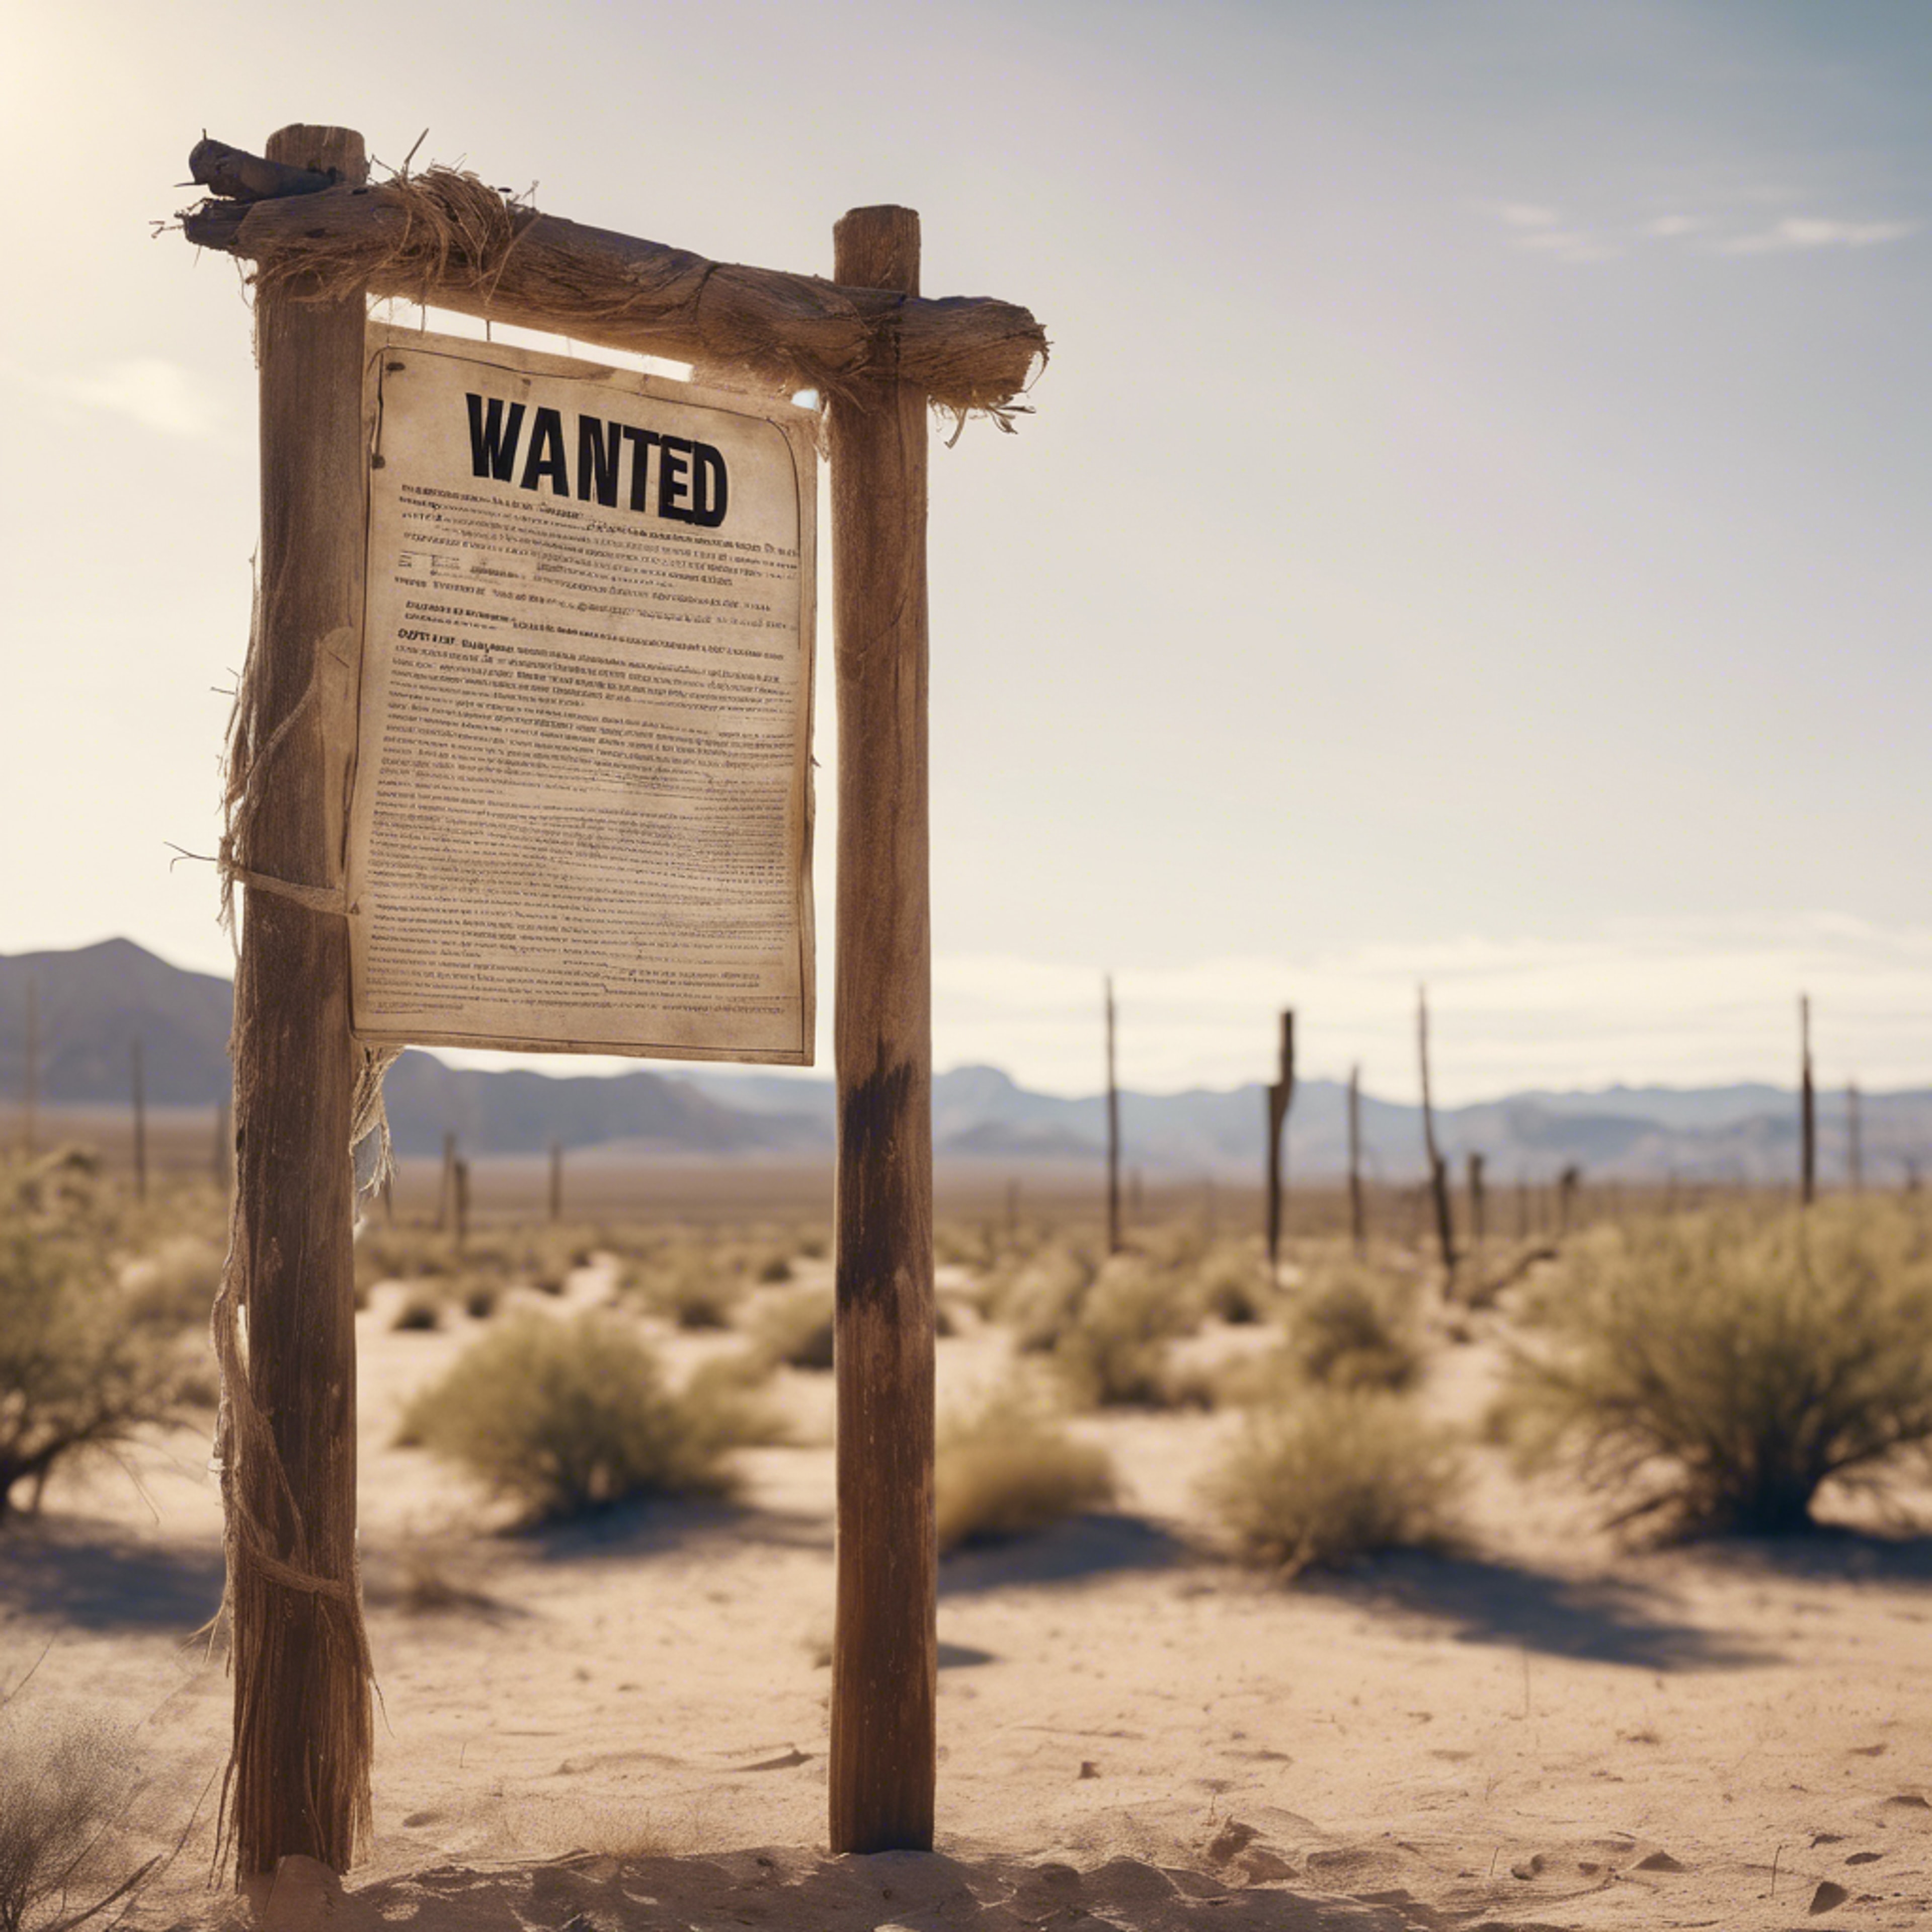 A wanted poster nailed to wooden post in a windy desert town, offering a reward in bold letters. Wallpaper[1e032392f4784d5094da]